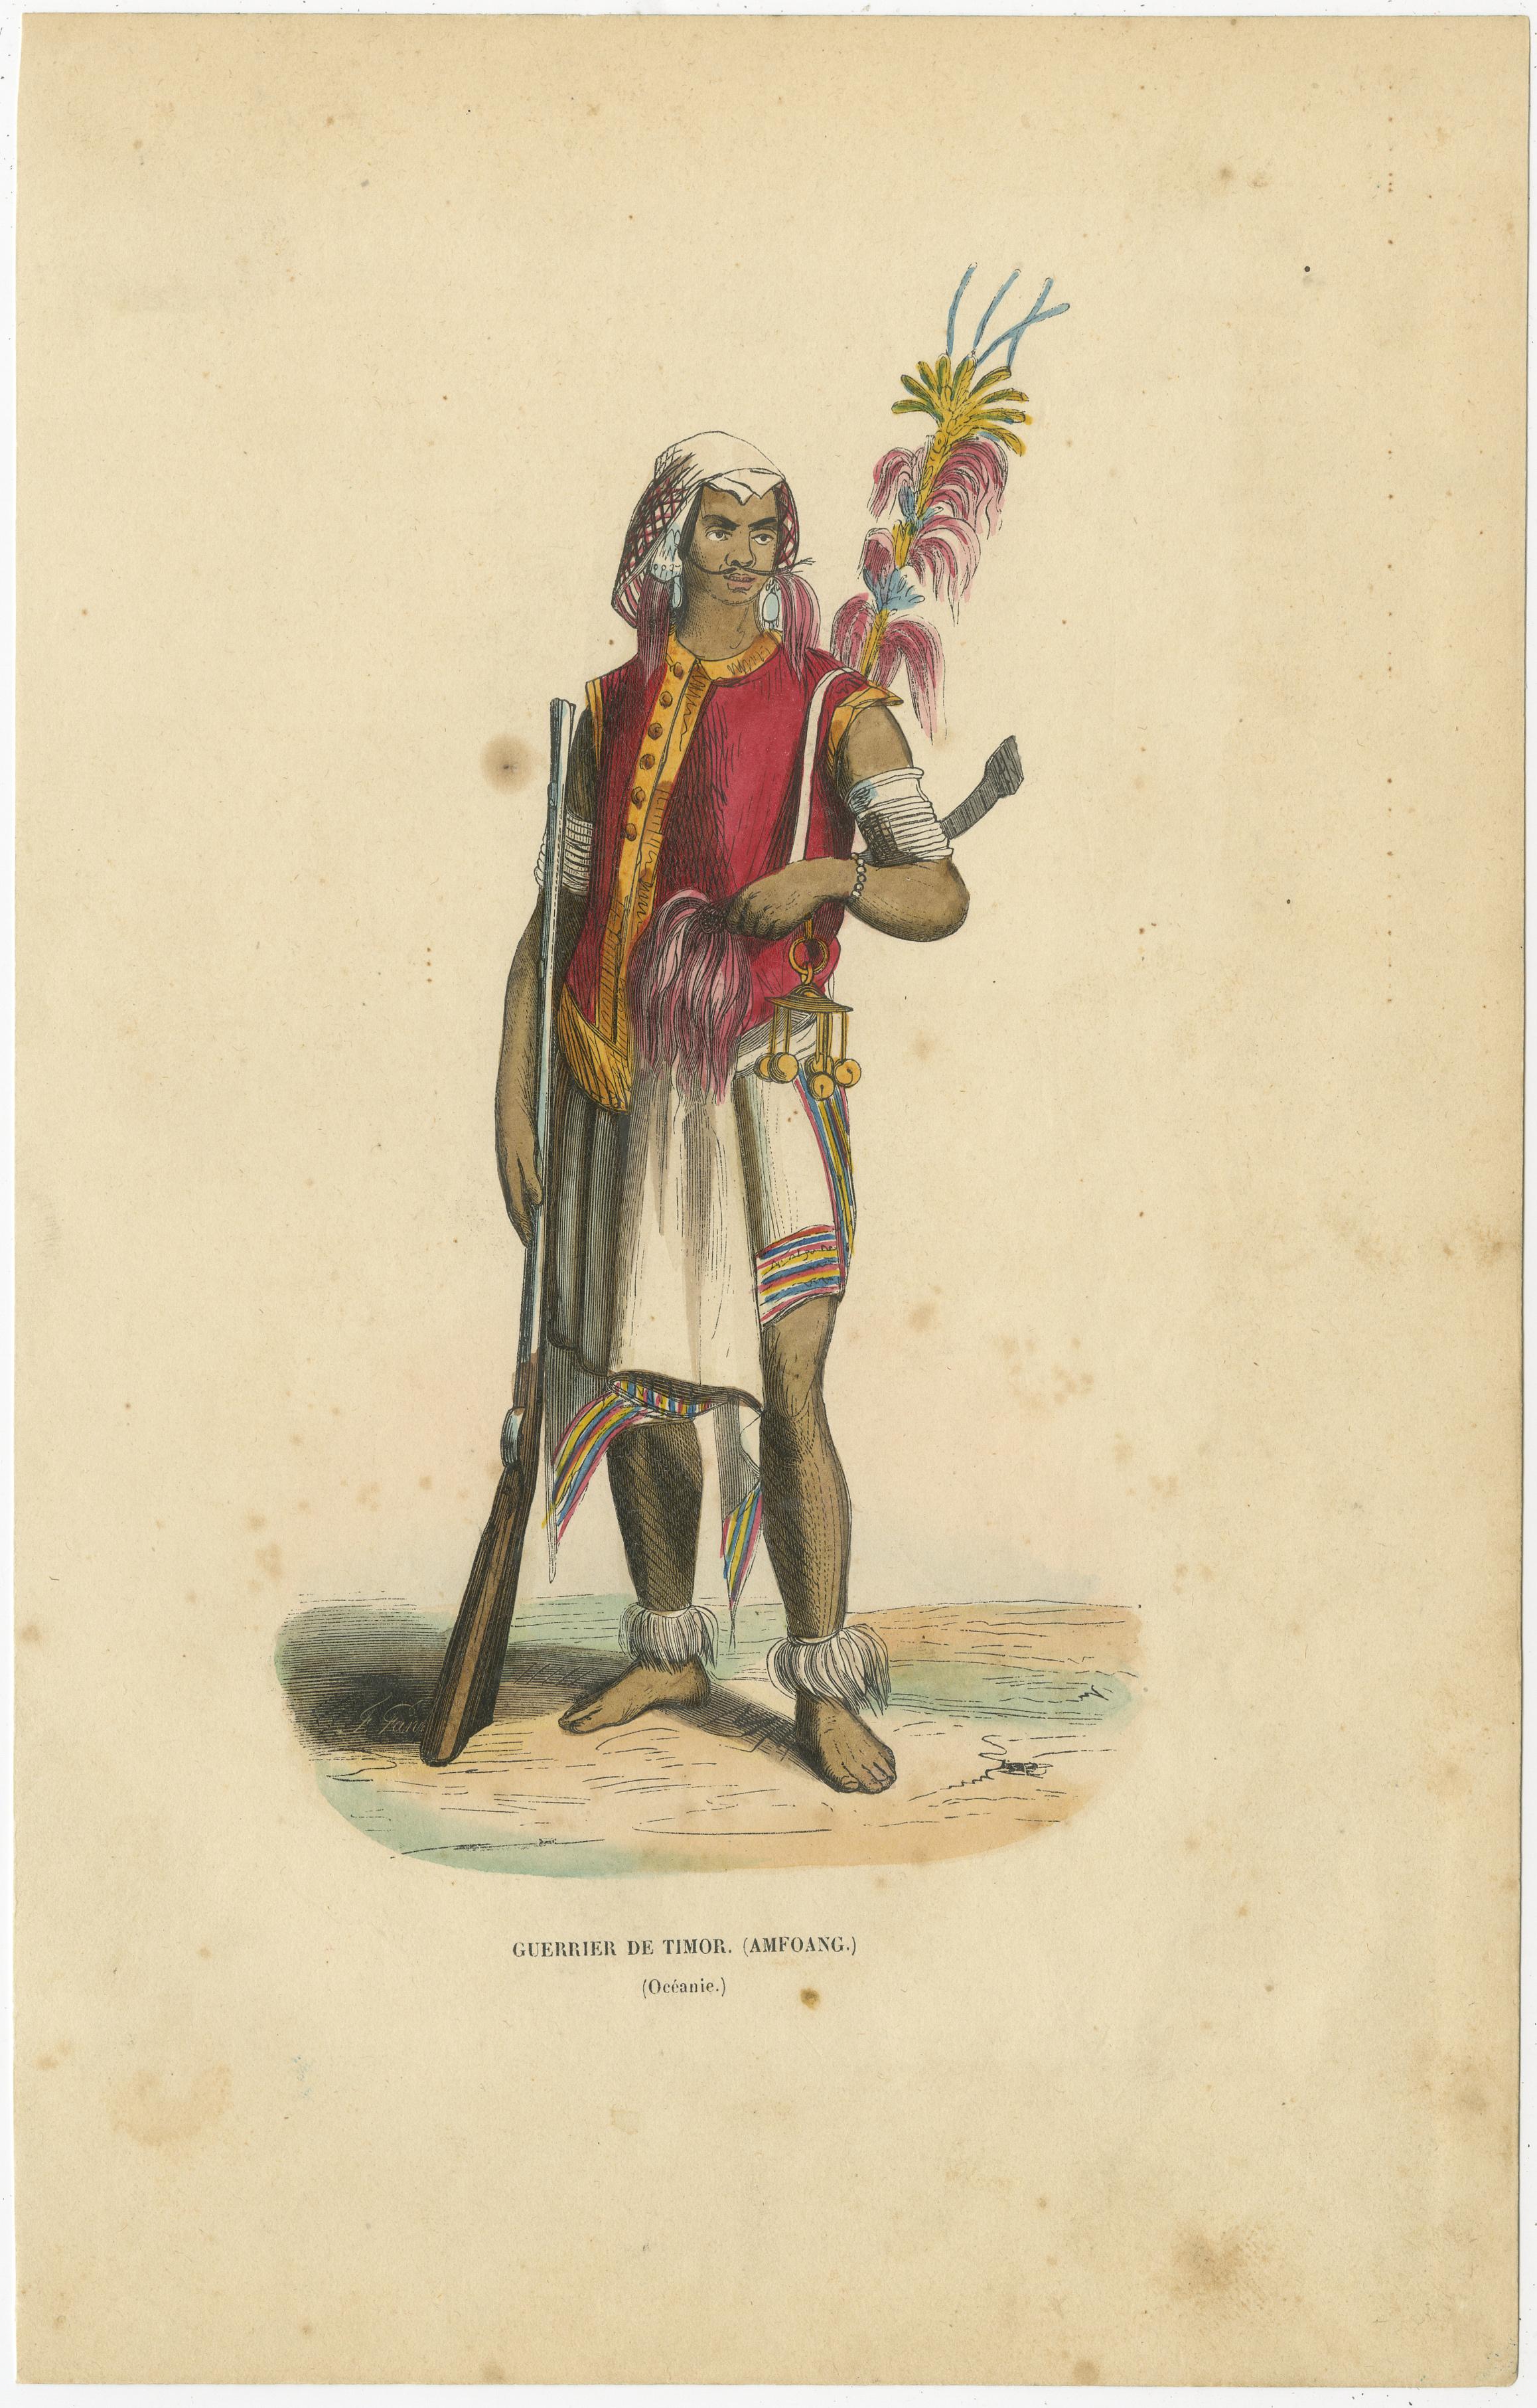 This antique print, titled 'Guerrier de Timor (Amfoang),' provides a vivid portrayal of an Atoni warrior from Kupang, West Timor, Indonesia. The hand-colored woodcut captures intricate details of the warrior's attire and adornments. He is depicted